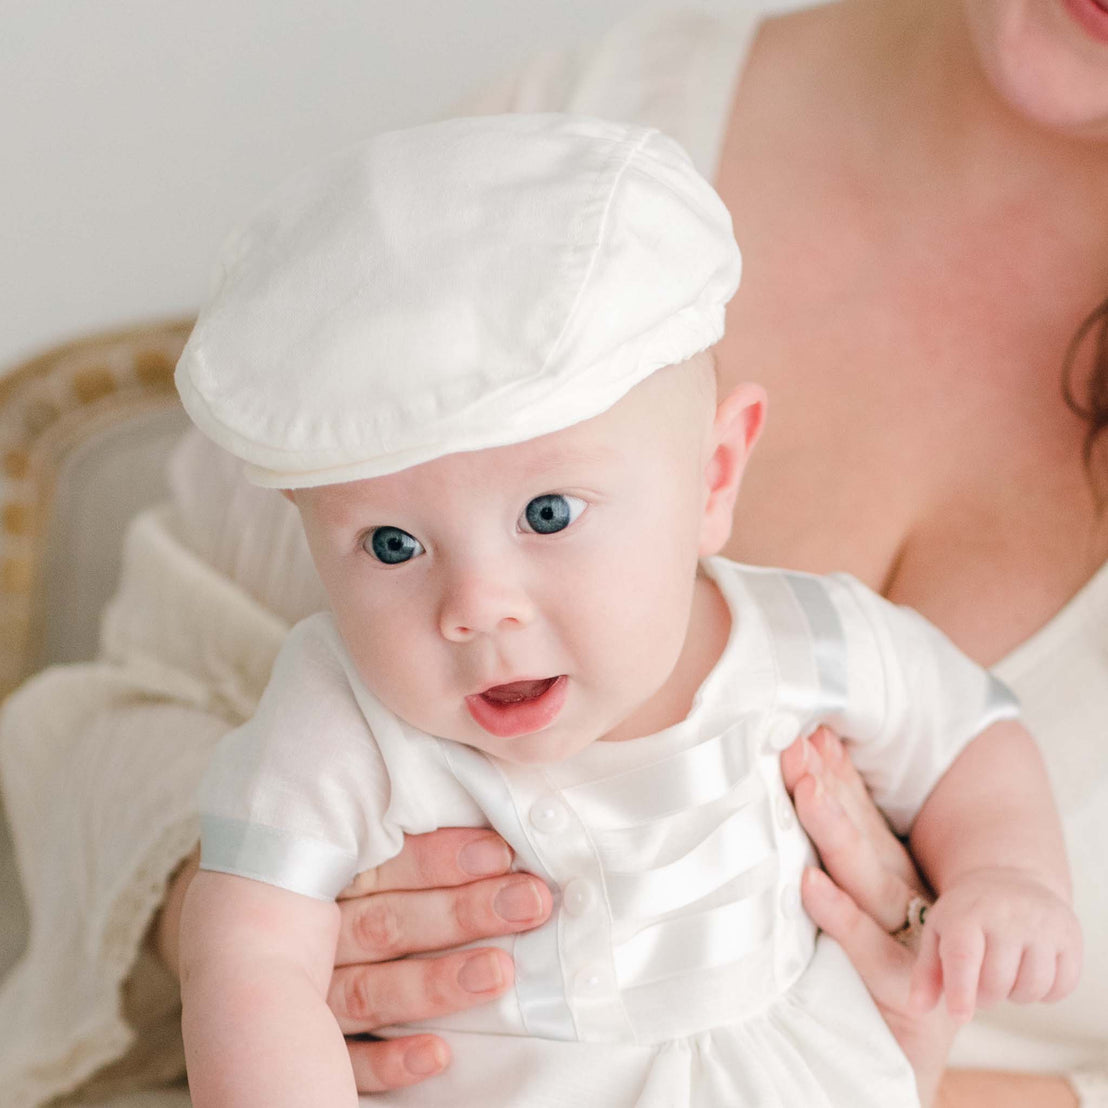 A baby with bright blue eyes wearing an Owen Romper Accessory Bundle sits cradled in the arms of an adult, glancing slightly to the side.